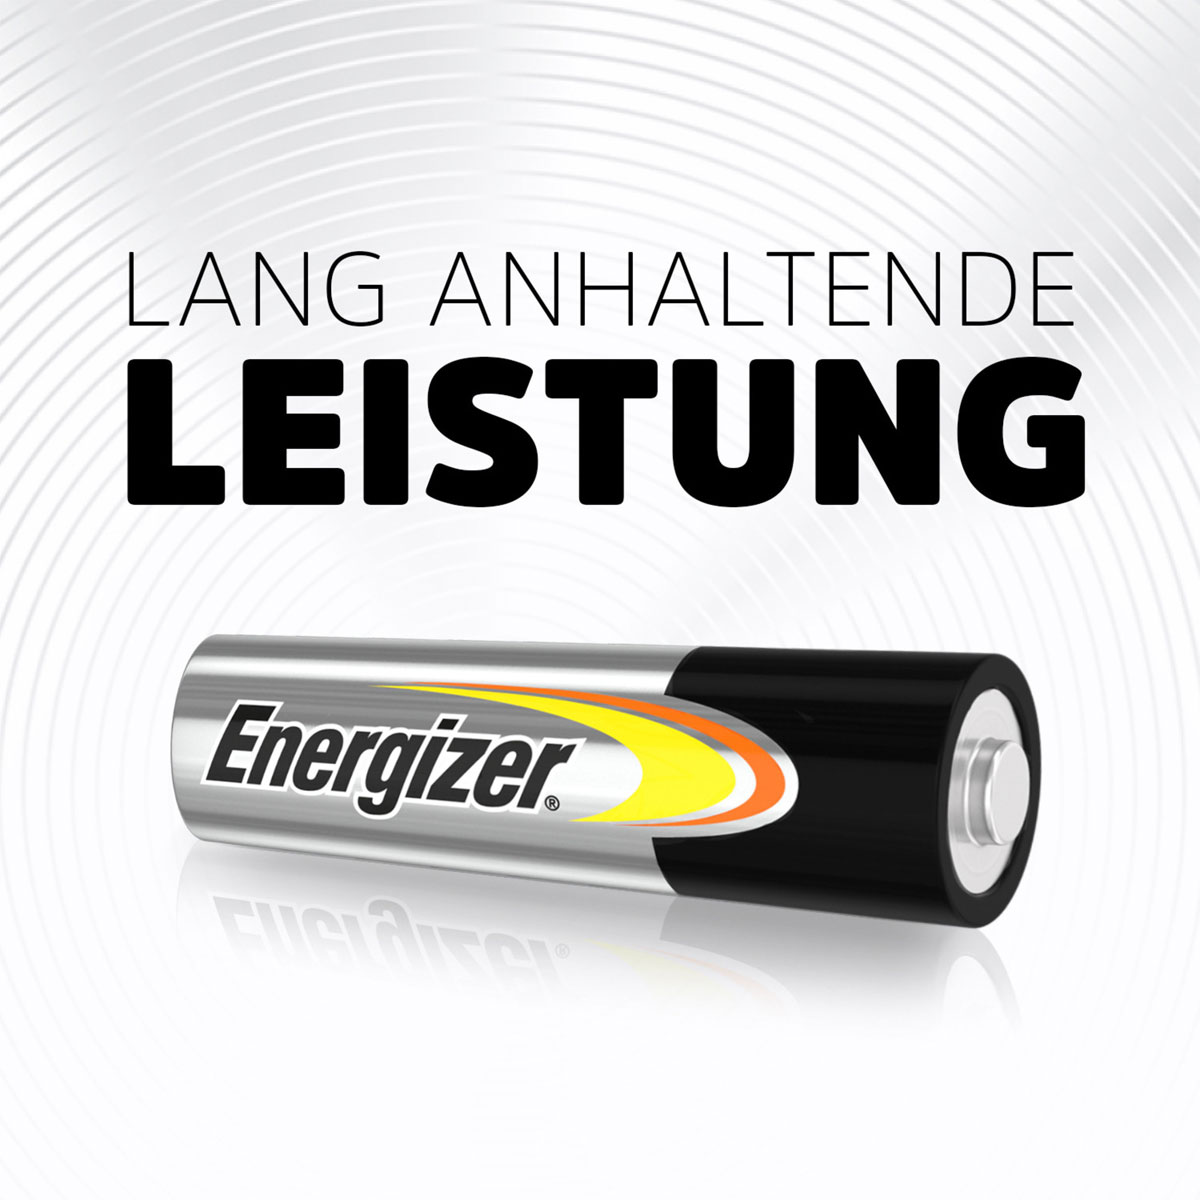 Lithiumbatterie Ultimate - AA/LR6 - 1,5 V - 4 Stück - Energizer 